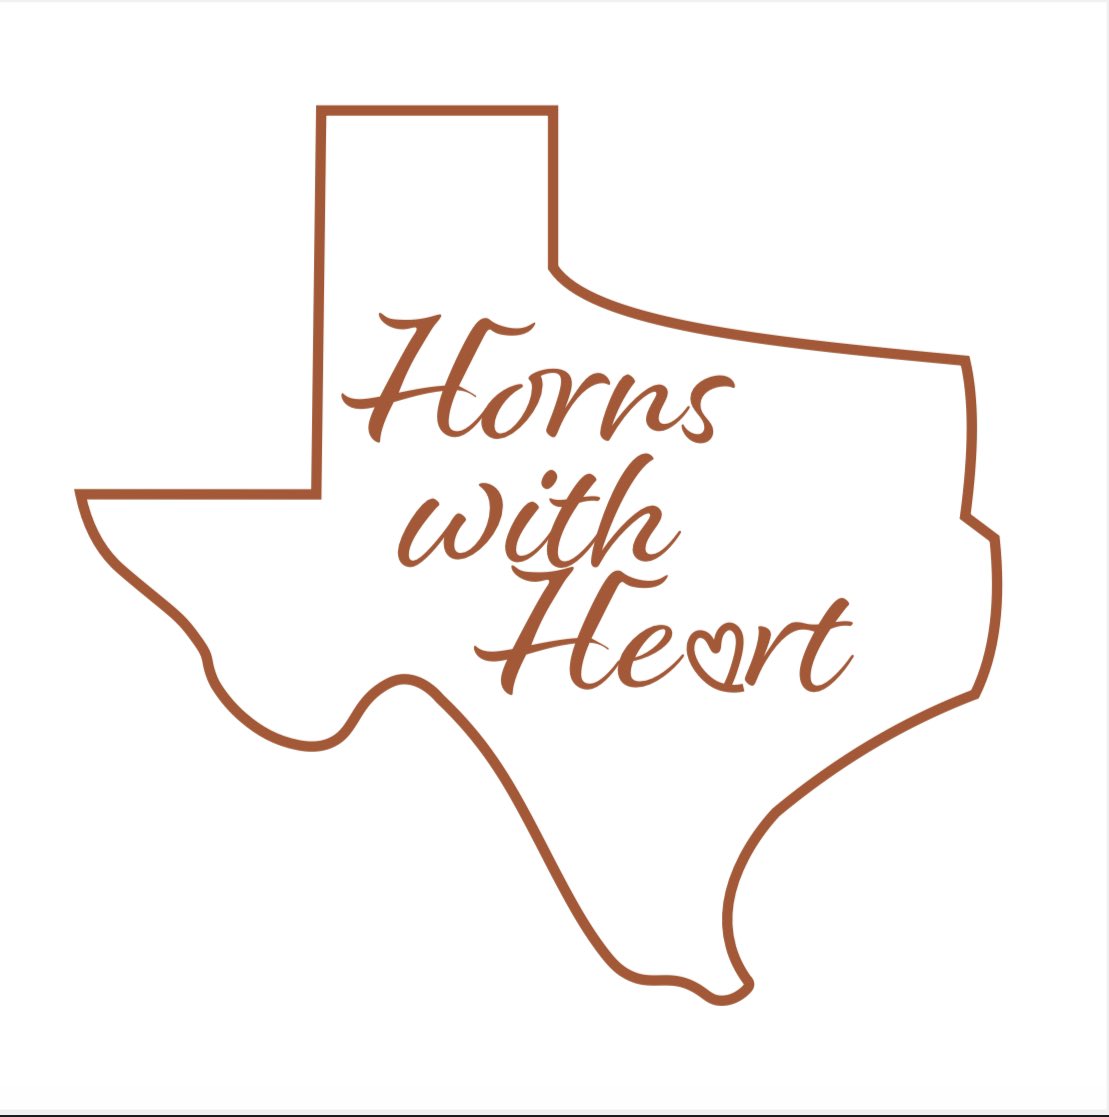 Horns with Heart, the first charitable NIL entity, is proud to sponsor the Pancake Factory. Starting 8/1/22 all scholarship Offensive Linemen at the University of Texas will receive $50,000 annually ($800,000 combined) for use of their NIL and participating in charitable causes.